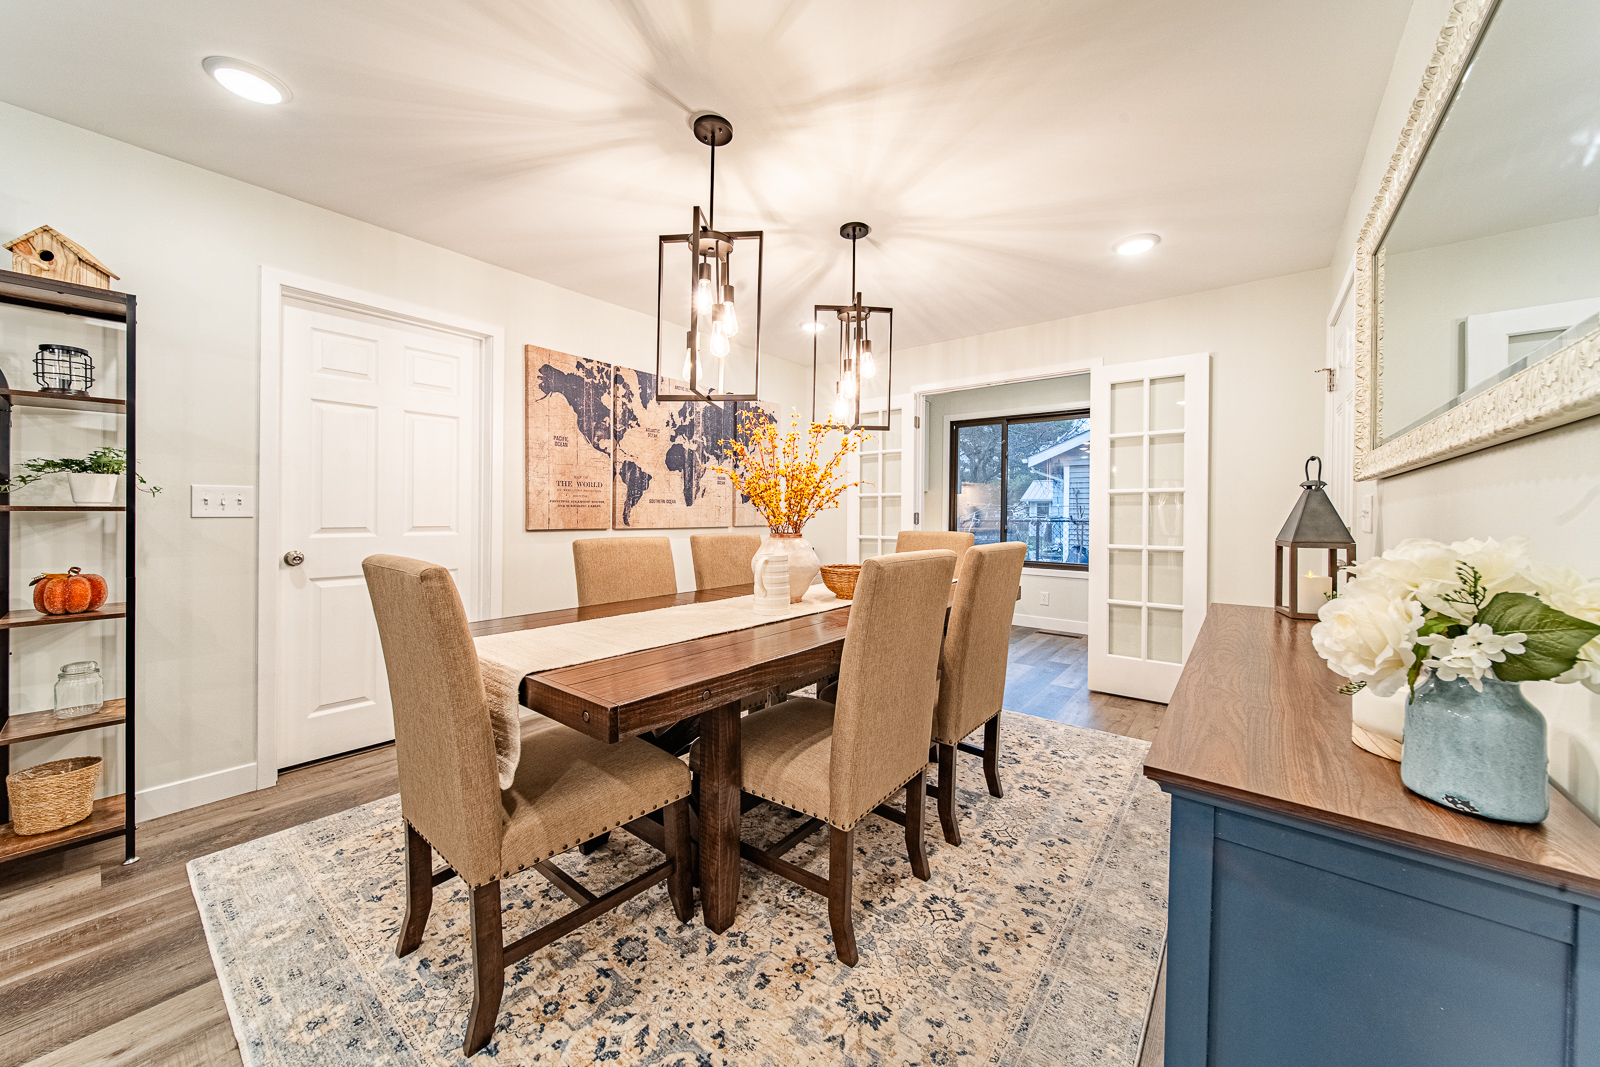 Newly transformed dining area in a West Lafayette home, ideal for family gatherings.